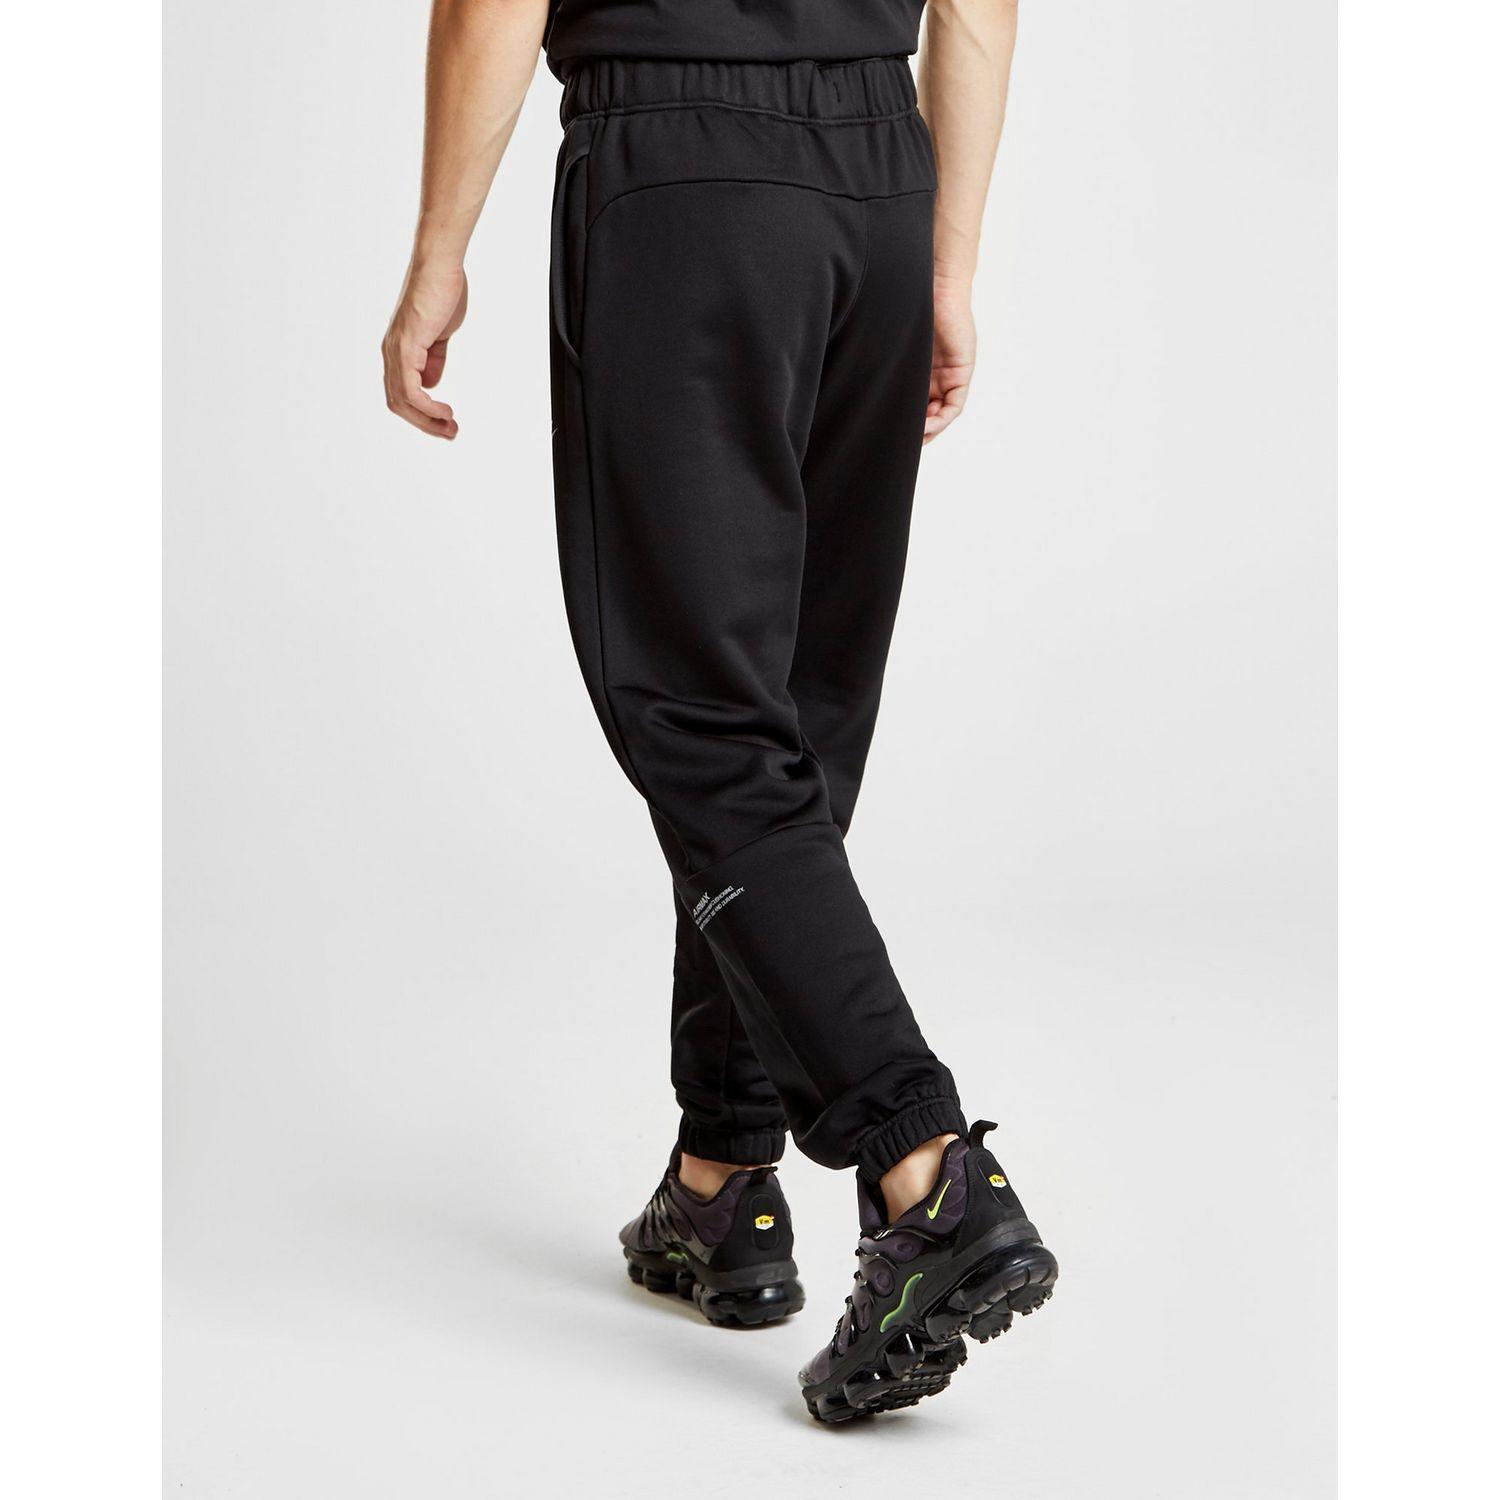 Nike Cotton Sportswear Air Max Joggers in Black for Men - Lyst